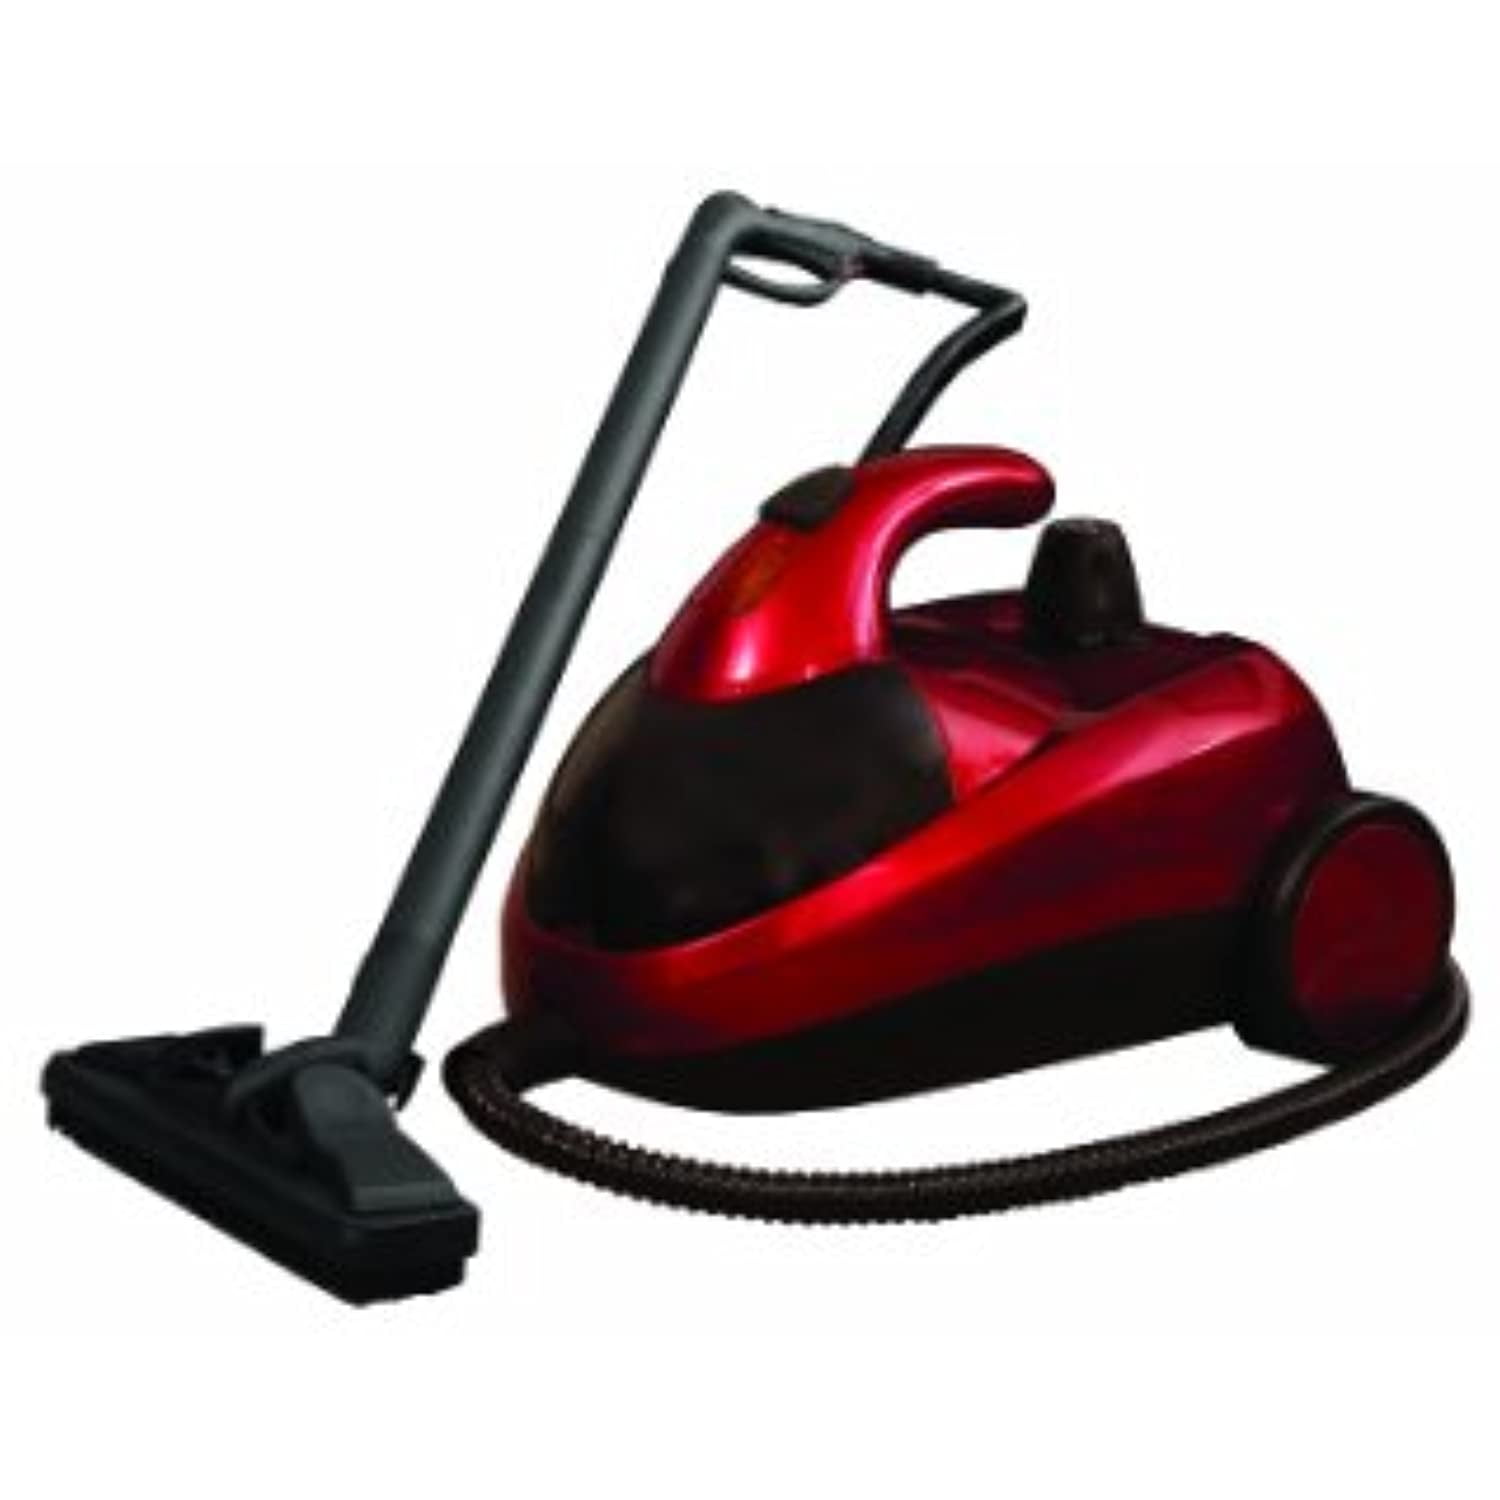 Ewbank SC1000 Steam Dynamo Cleaner for Chemical-Free Cleaning - Walmart.com